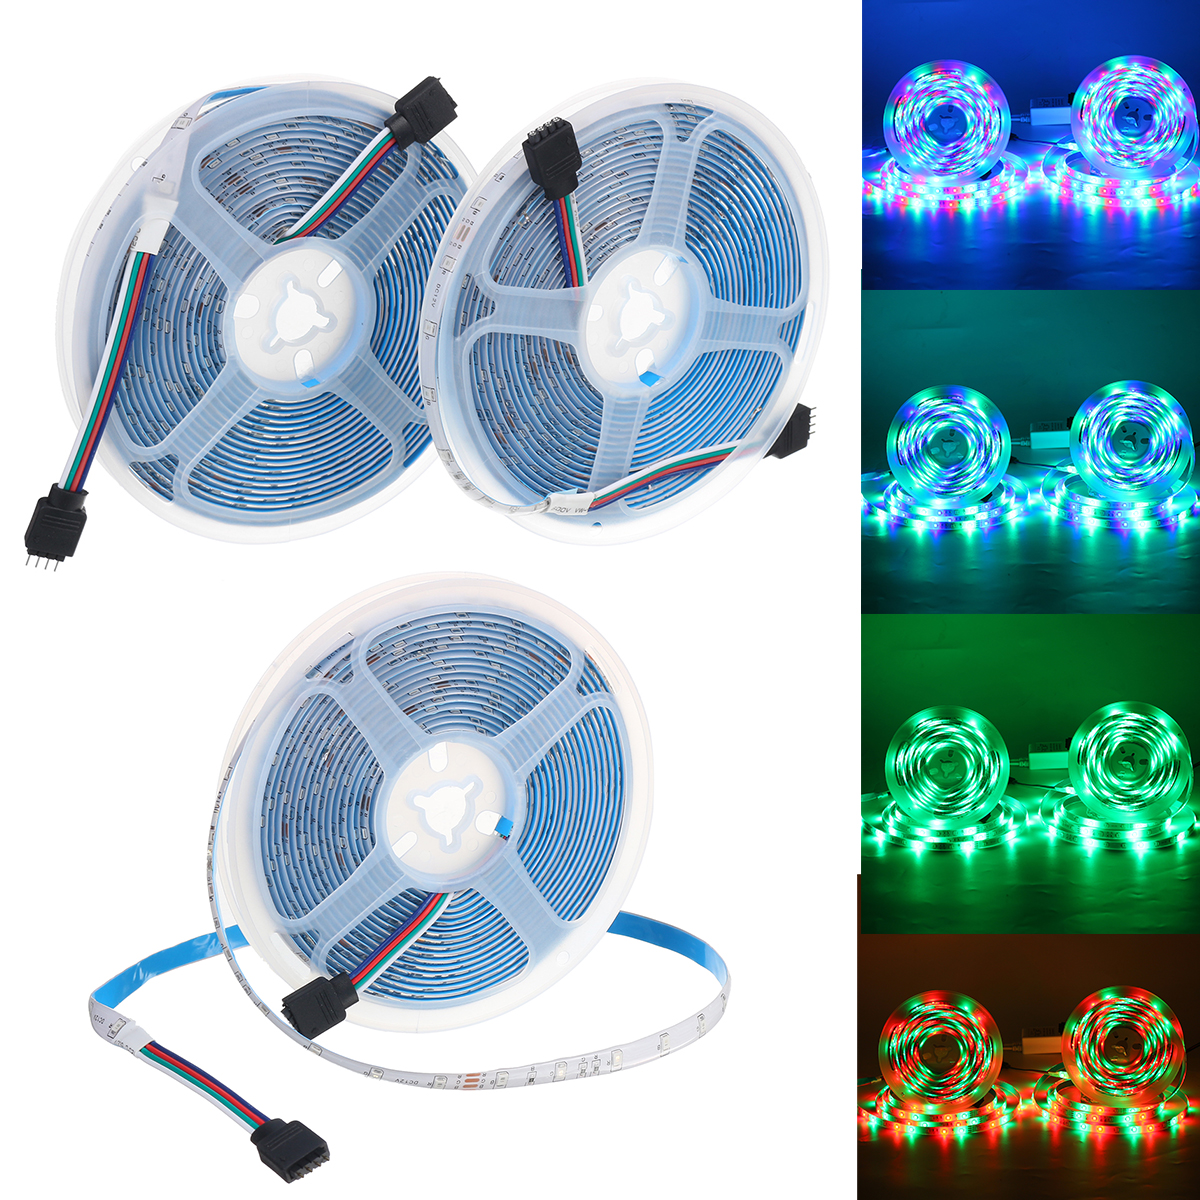 Waterproof-25M-SMD2835-LED-Strip-Light-Kit-RGB-Flexible-Outdoor-Tape-Lamp-with-5A-Power-Adapter--44k-1722367-2